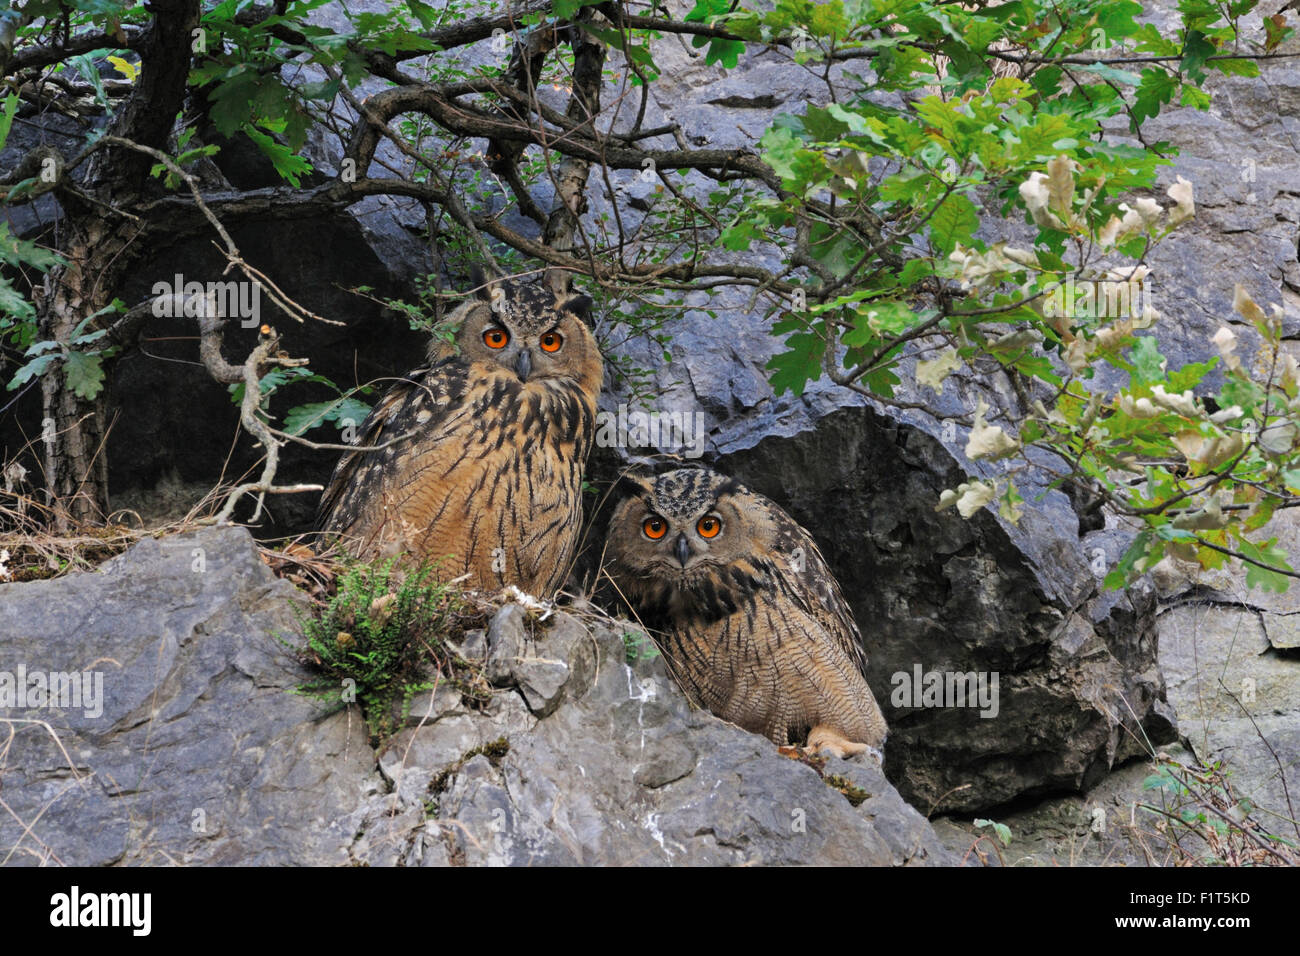 Two wild Northern Eagle Owls / Europaeische Uhus ( Bubo bubo ) hiding over day under bushes in an old quarry, watching narrowly. Stock Photo